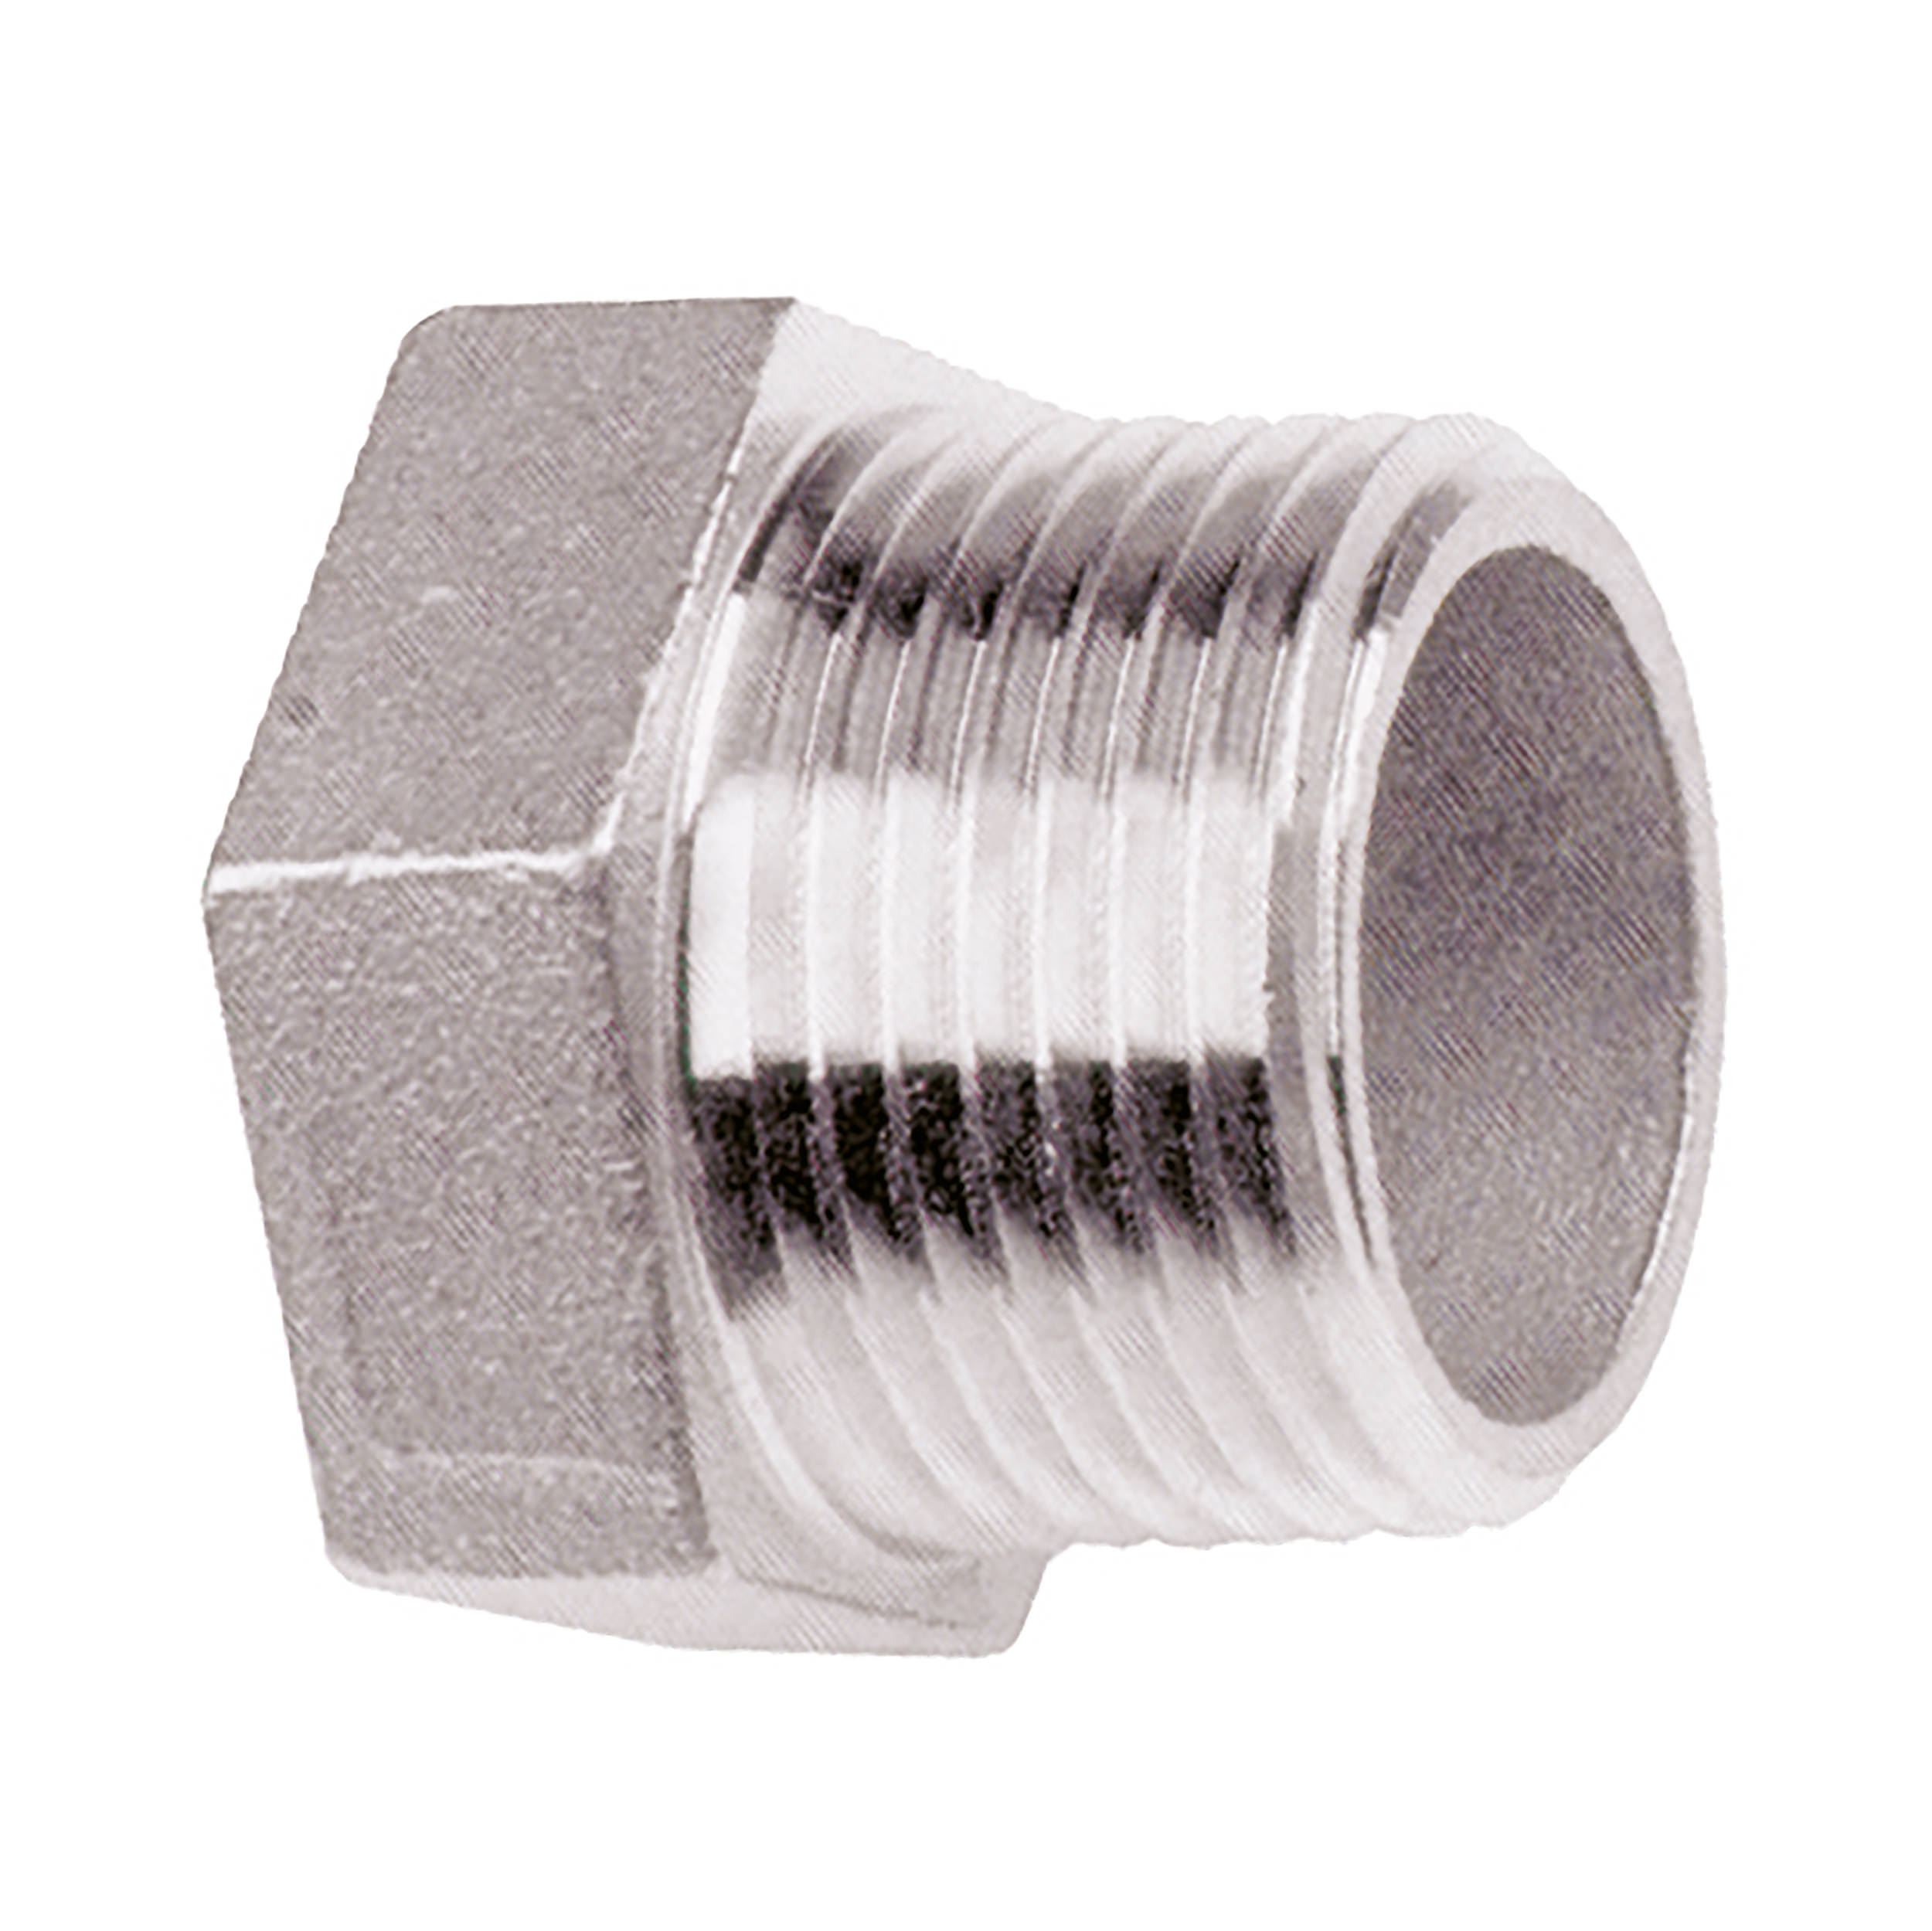 Hexagonal plug stainless steel, V4A, thread: G⅛ male (conical male thread acc. to ISO 7/1), length: 21 mm, AF 12, DN 6